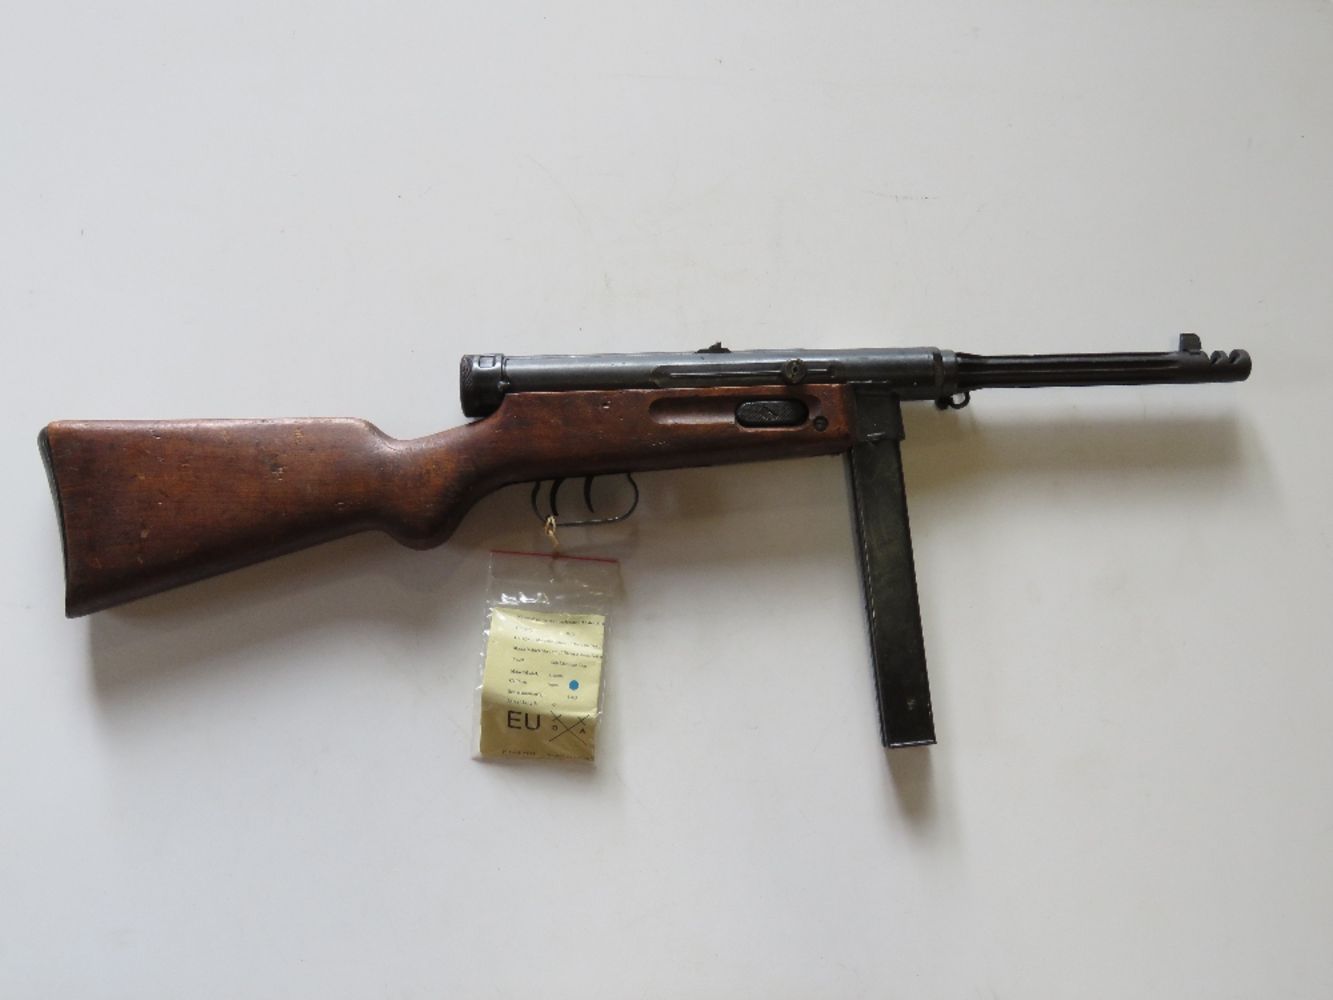 International Militaria - Timed Online Only Auction